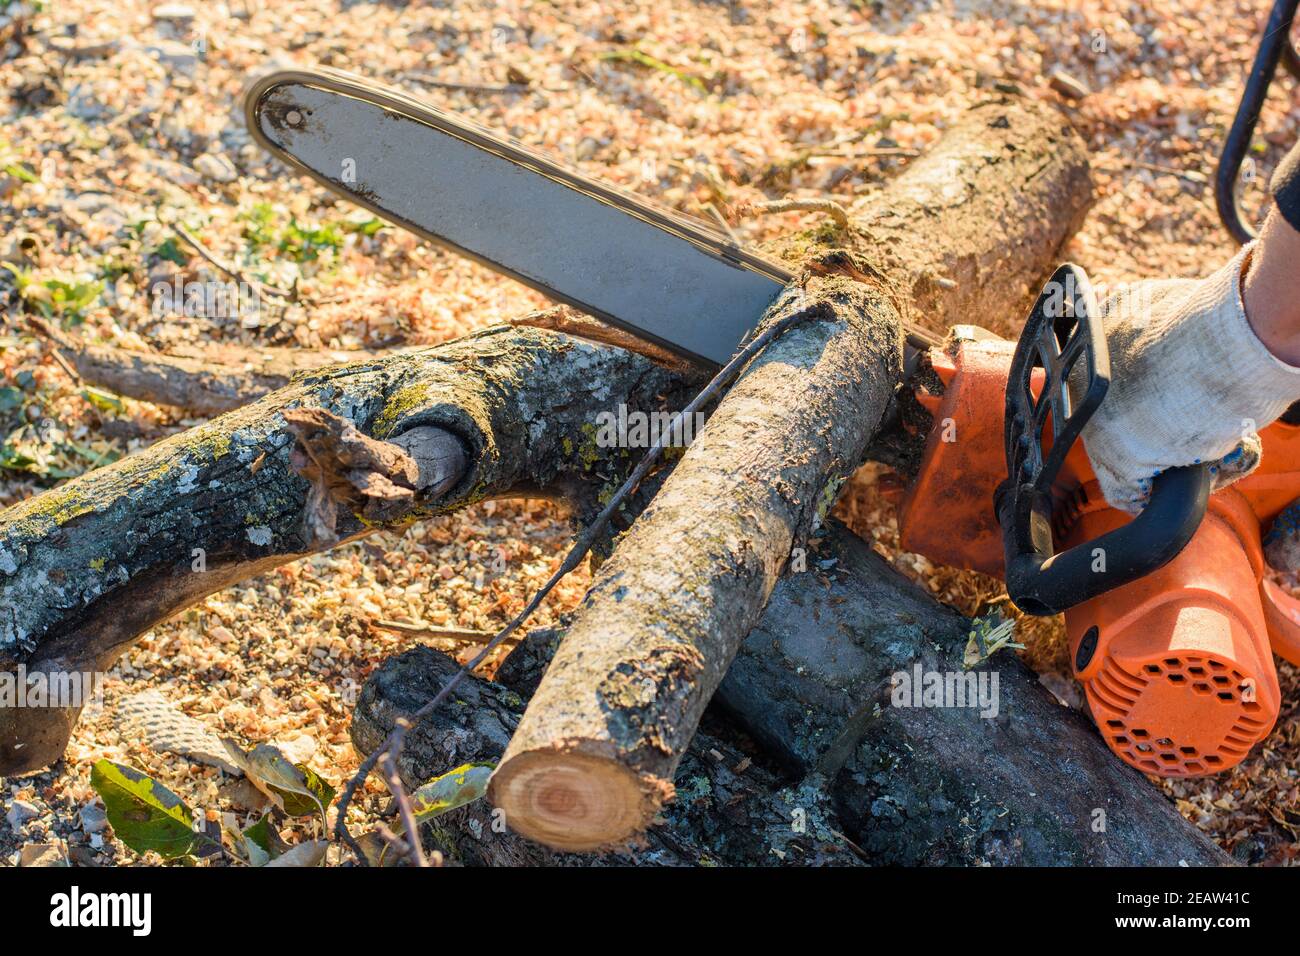 Man saws trees for firewood with an electric chain saw, close-up Stock Photo